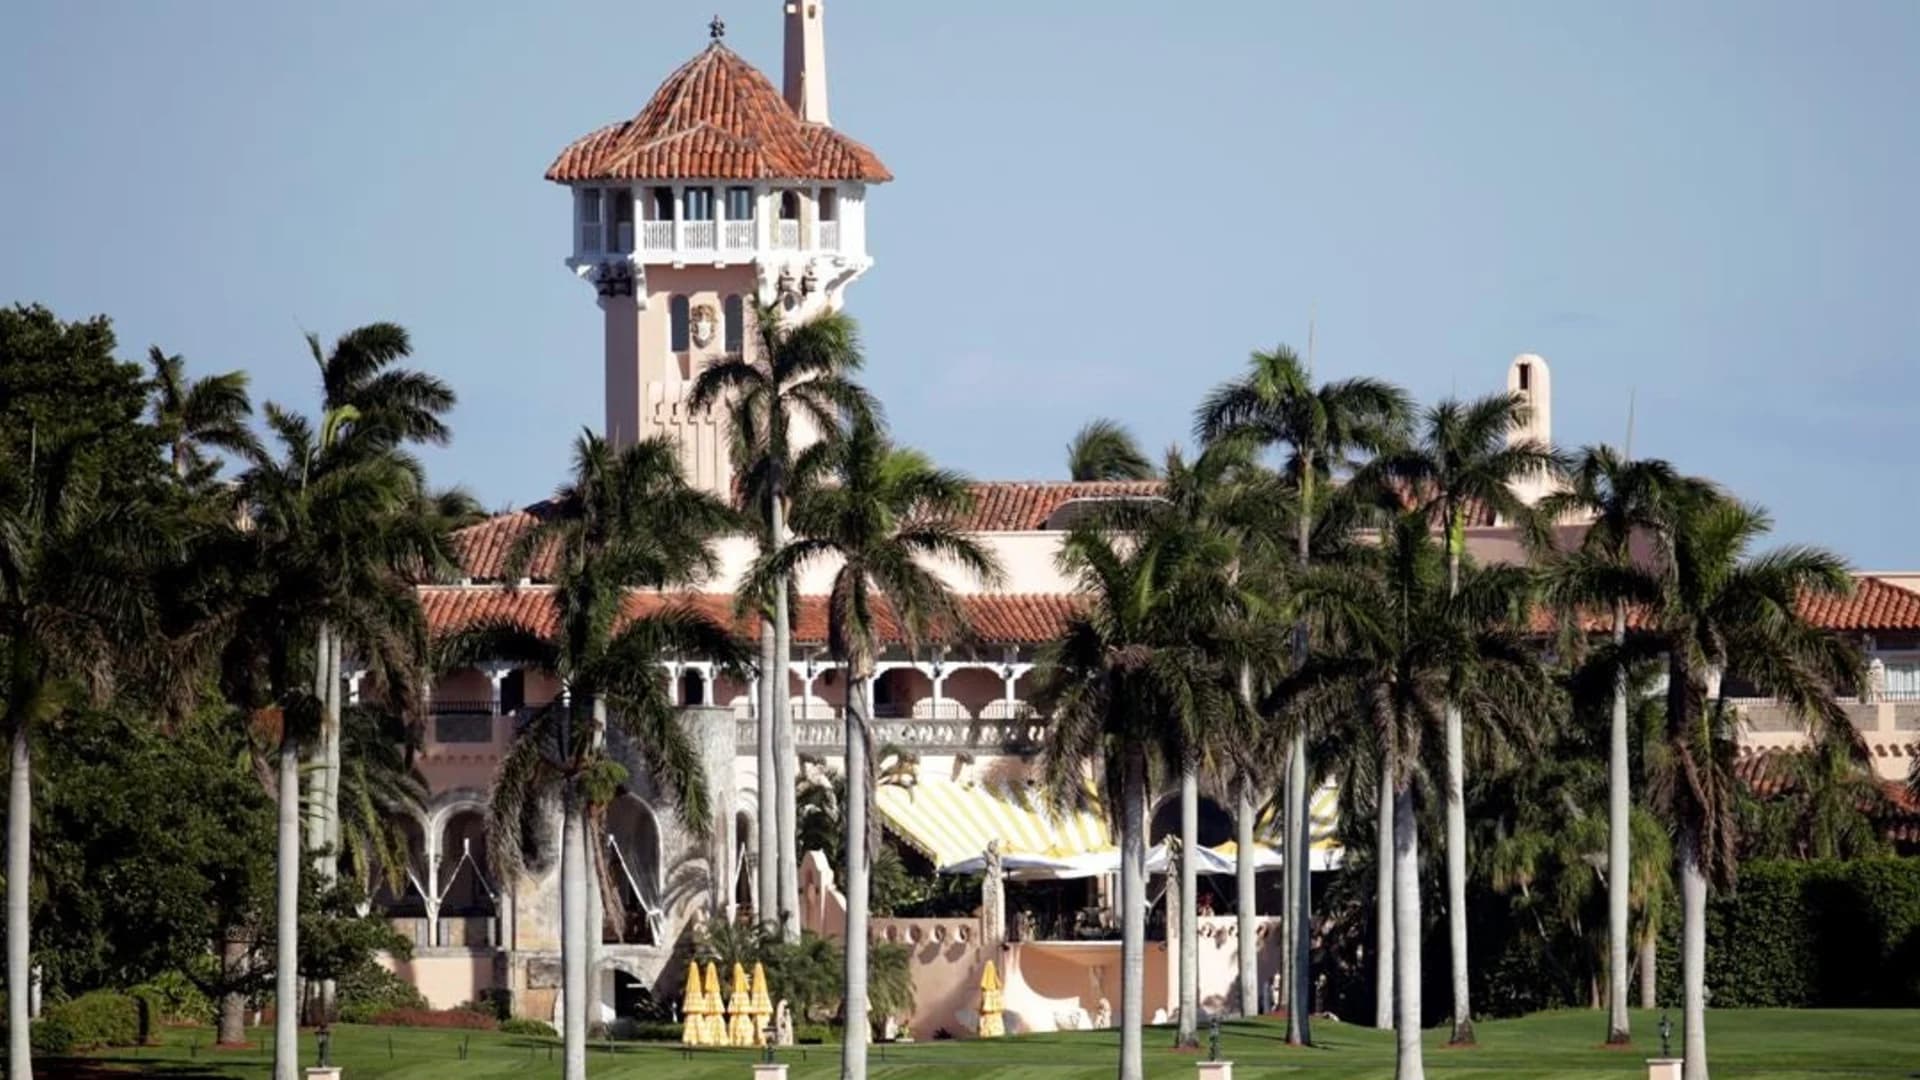 Police open fire at 'impaired' driver in Mar-a-Lago breach